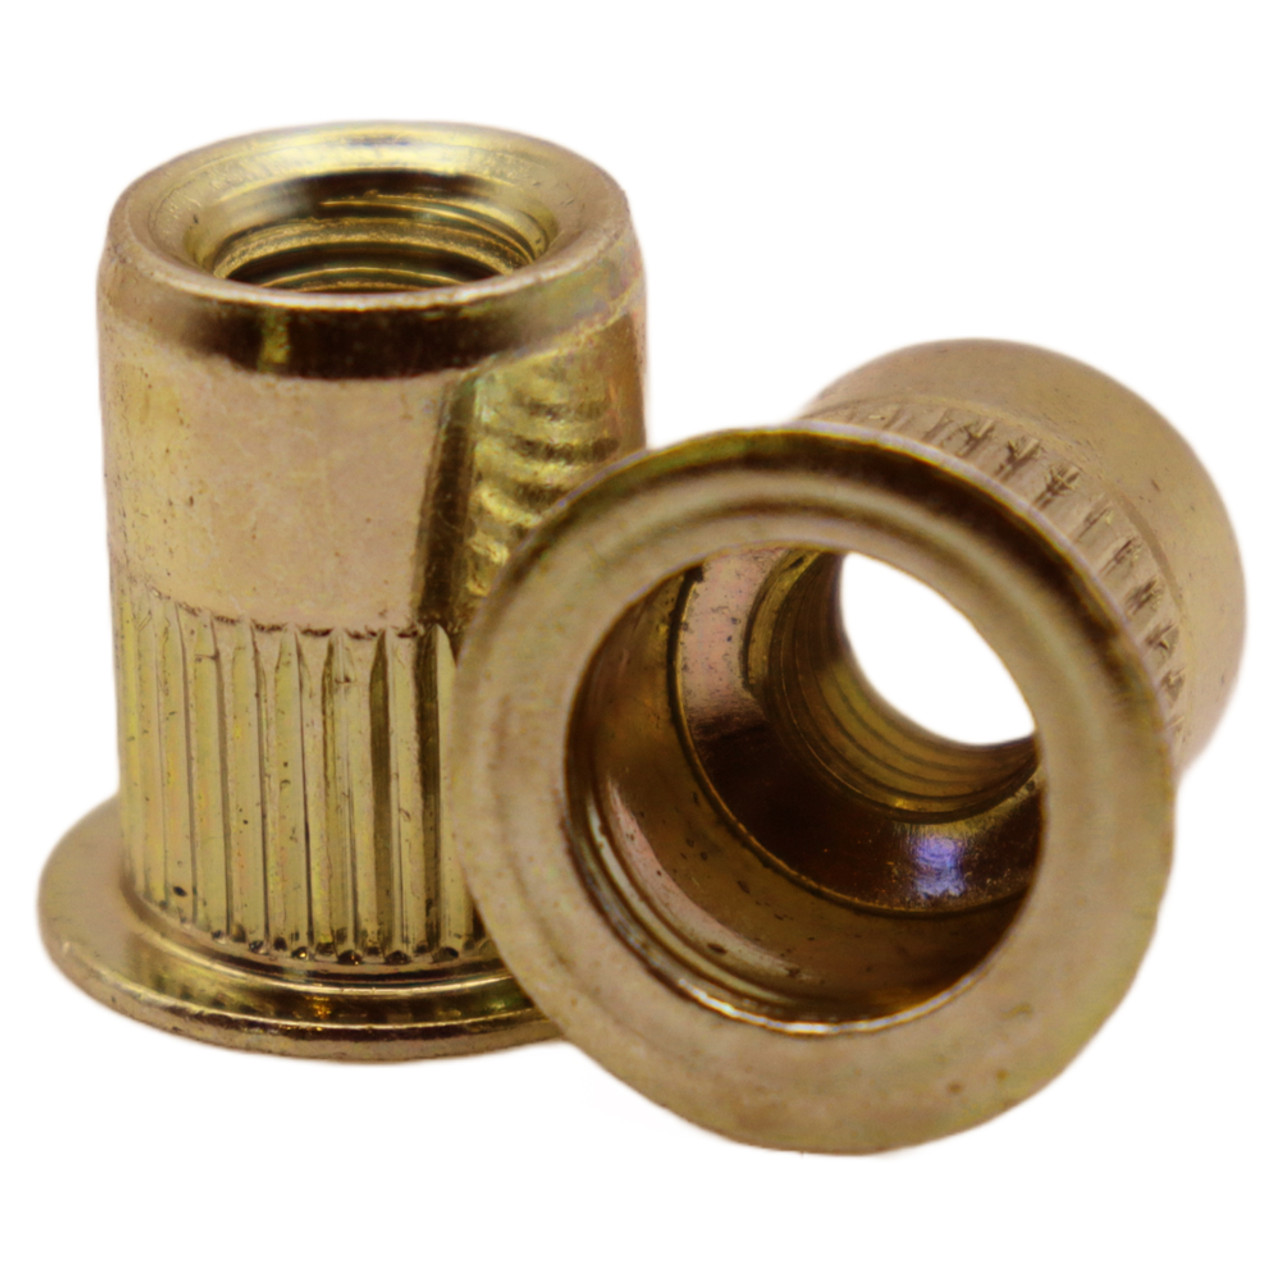 M5 x 0.80 (3.30-5.72 MM) Coarse Thread Large Flange Knurled Body Rivet Nut Low Carbon Steel Yellow Zinc Plated